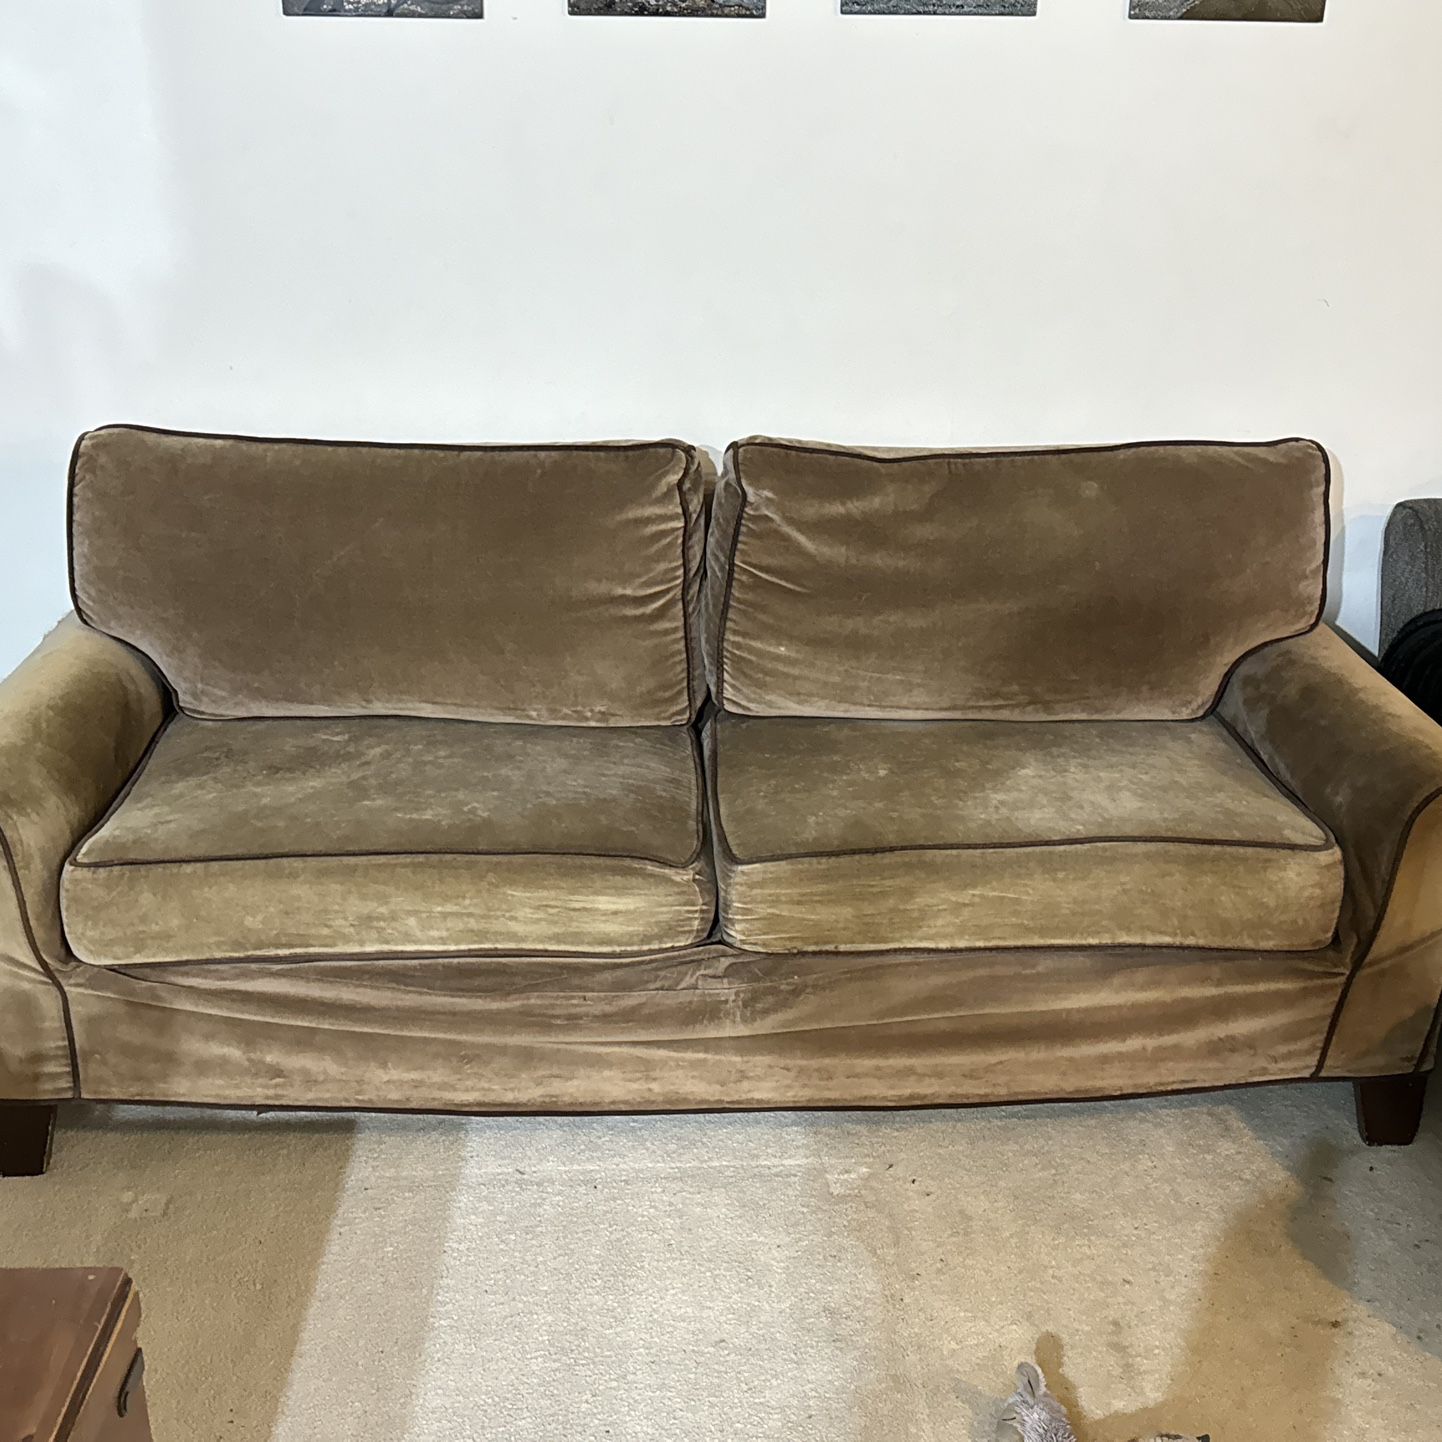 FREE Olive Colored Couch